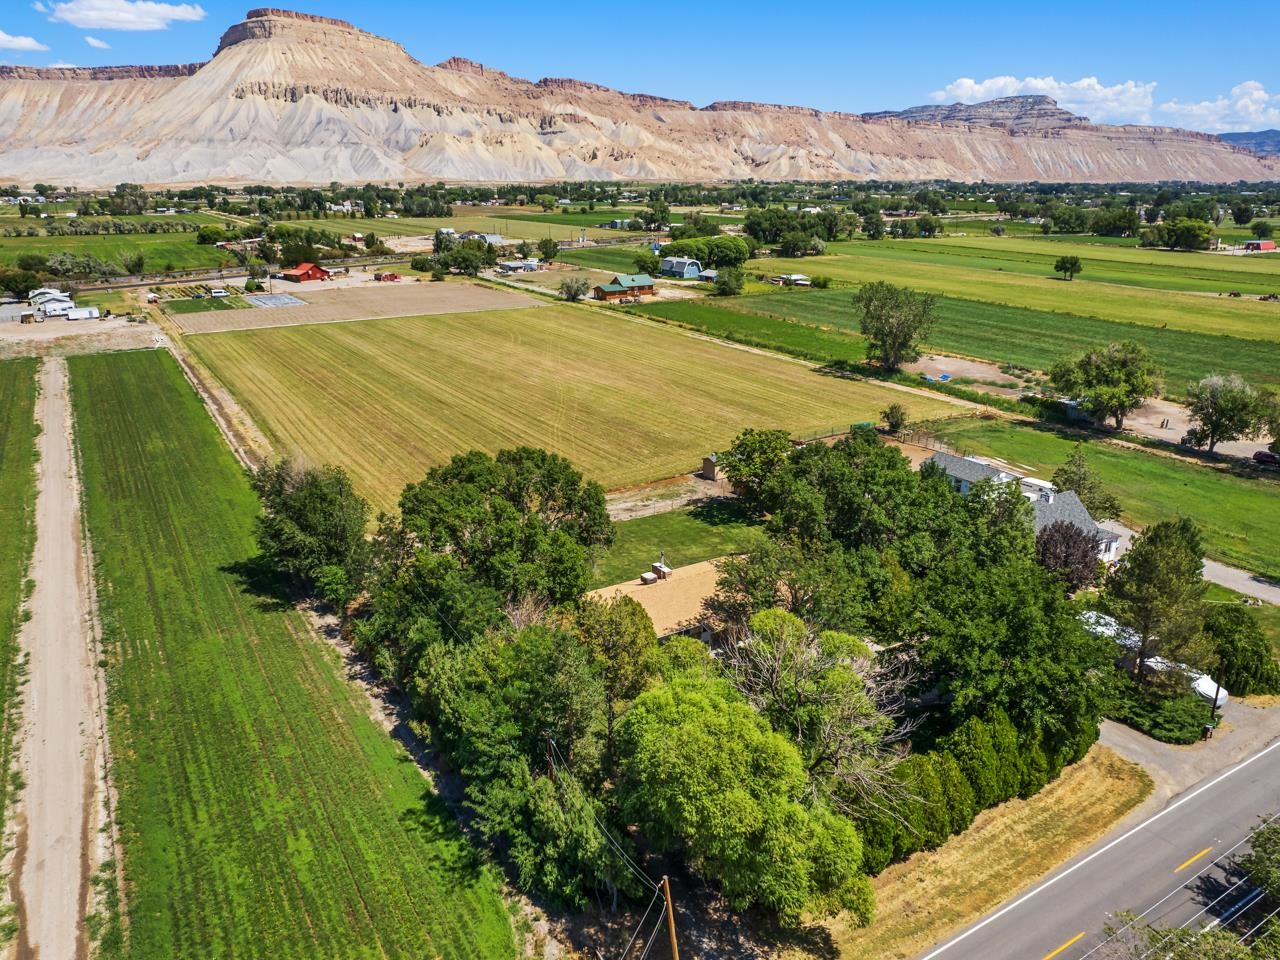 This is a fantastic opportunity to own a part of Grand Valley history! This incredible agricultural property in the Clifton / Palisade buffer zone is a reminder of what built the Valley into the charming cities we know today. Located between F Rd and Hwy 6, this home sits on over 9 acres of land with unobstructed views of Mt. Garfield and the Bookcliffs and has a profitable produce stand on the other end. The water rights run with the land which means you have the opportunity to grow crops, raise some livestock, and build the homestead or farm of your dreams - with a retail space to sell from already on location! If you’re not much of farmer, local resources are available to help you begin your own vineyard and take advantage of this location on the Palisade winery tour route. There are also opportunities to lease the irrigated land to other local farmers in the area. The home itself is a cozy with two living spaces that are both light and bright, one with a stone, wood burning fireplace. The primary bedroom has a 3/4 ensuite bath and down the hall are an additional two rooms and a full bath. The yard is fully fenced and has fantastic views of the Bookcliffs and Mt Garfield to enjoy while entertaining guests. The mature trees keep things shaded and there is an uncovered patio to take in the views from as well as a shed/former chicken coup. This is an incredible opportunity to find your place in the agricultural area of Western Colorado!